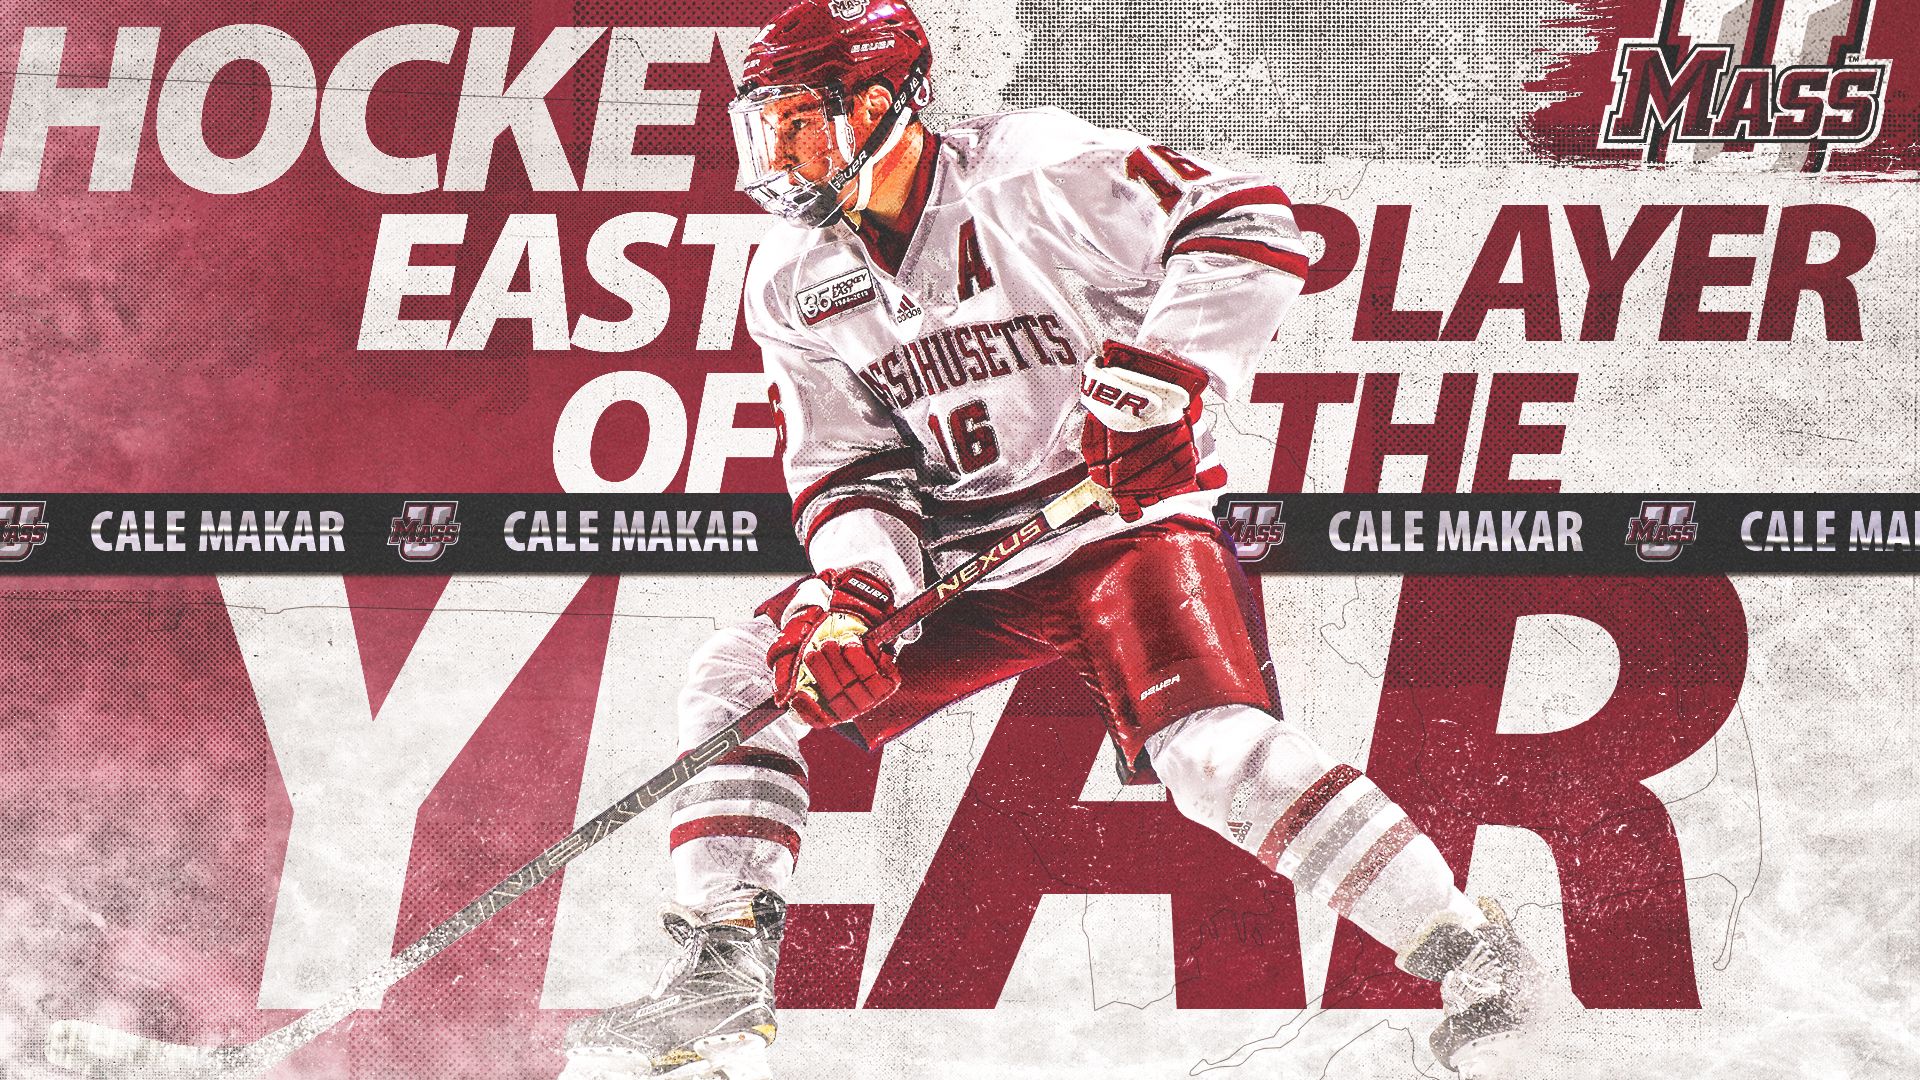 Makar Earns Hockey East Player Of The Year By Unanimous Selection.